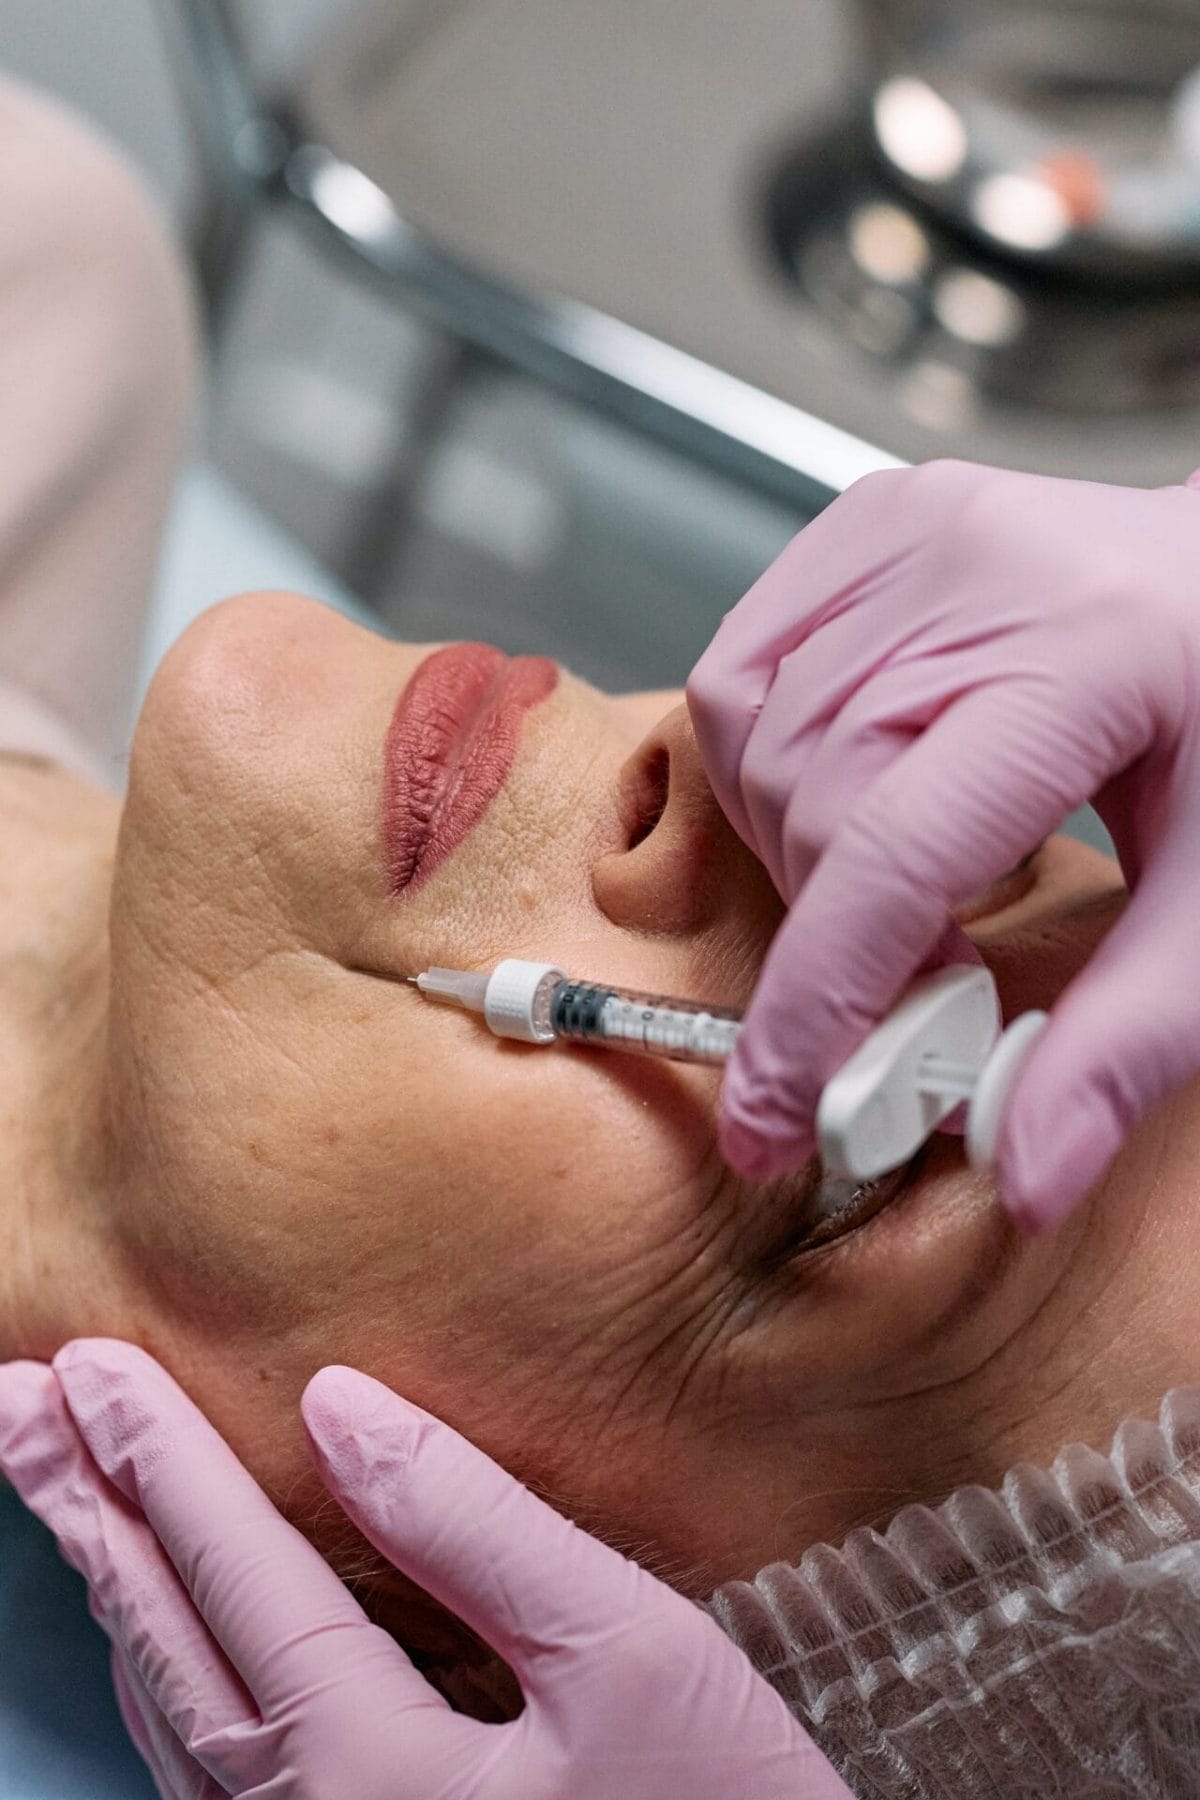 A woman receiving a cosmetic facial injection at a medspa clinic.